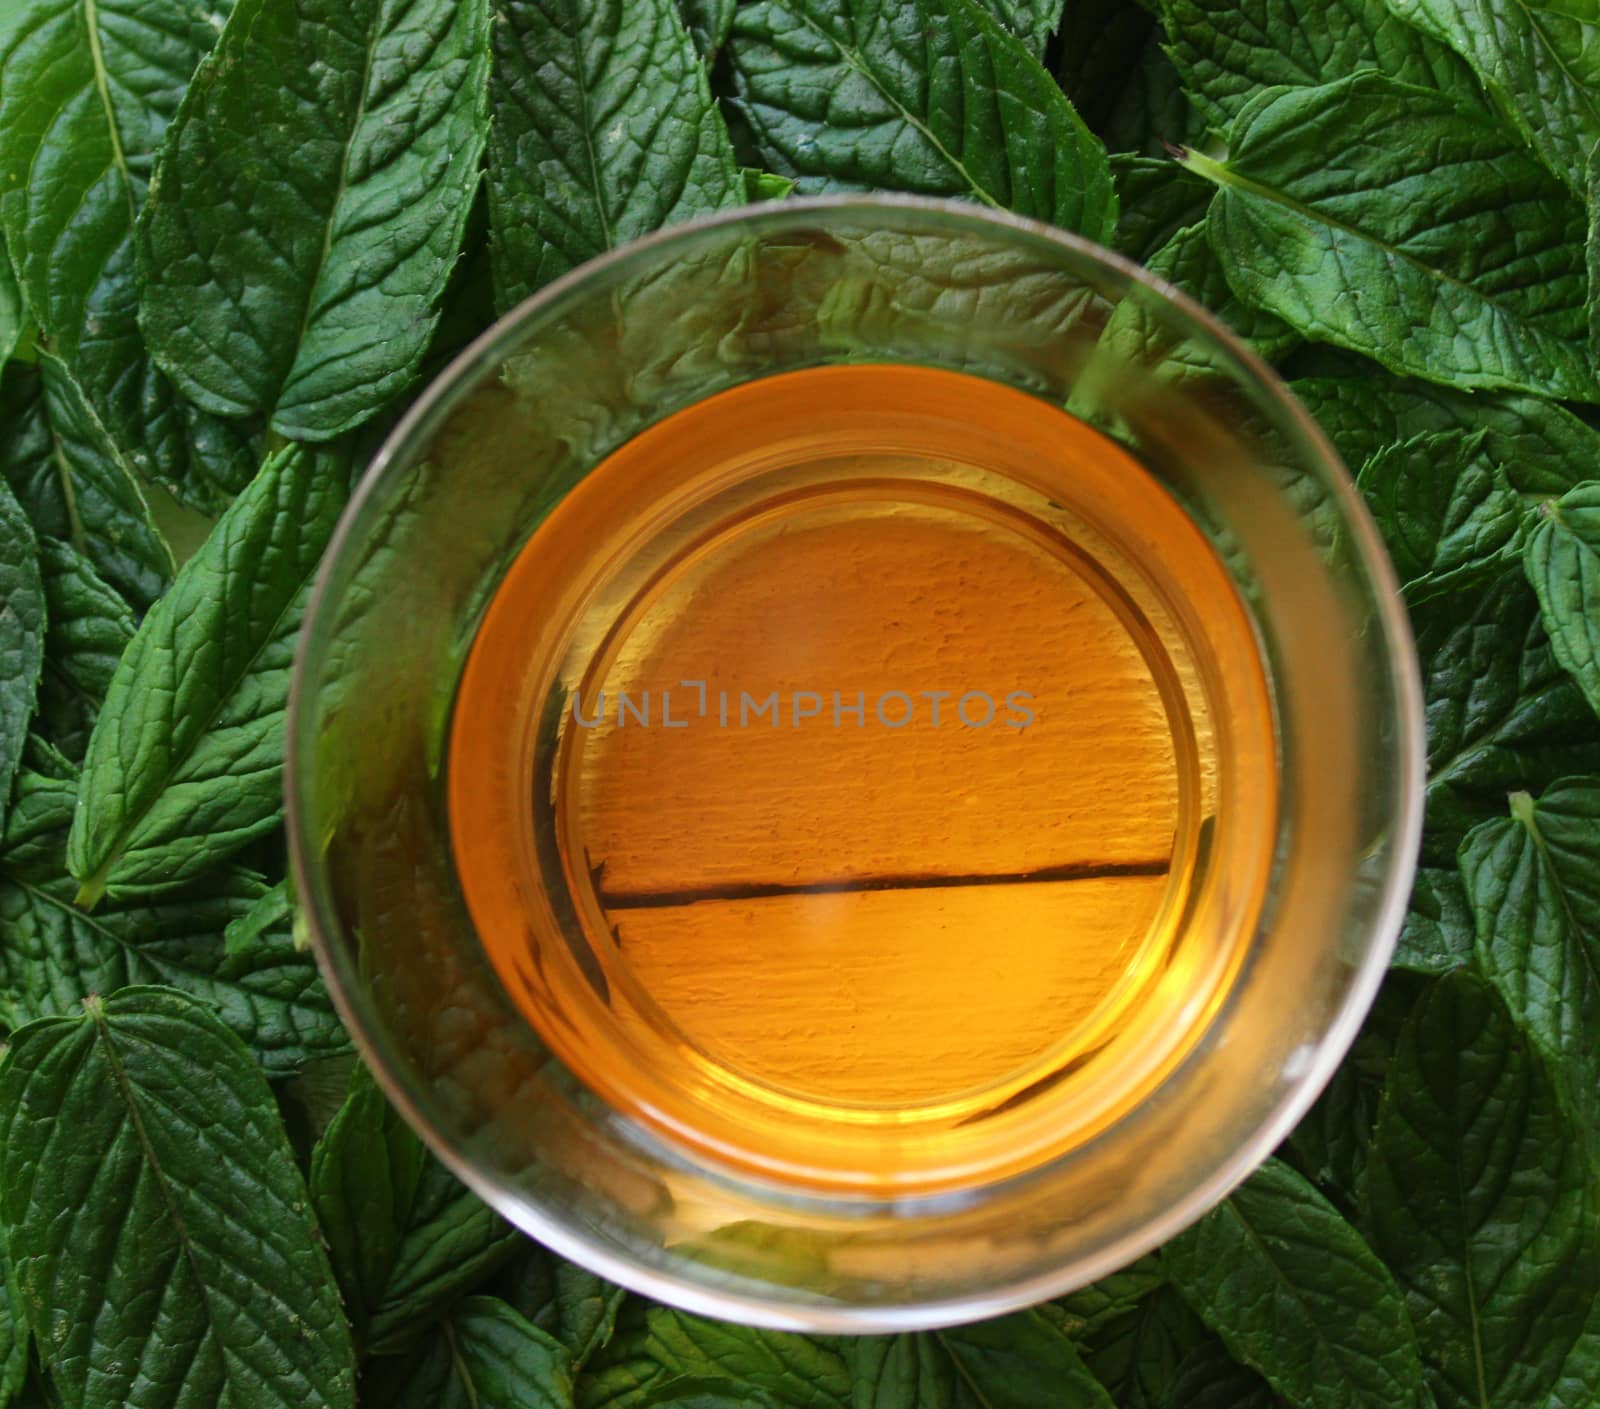 The picture shows a cup of tea and fresh peppermint leaves